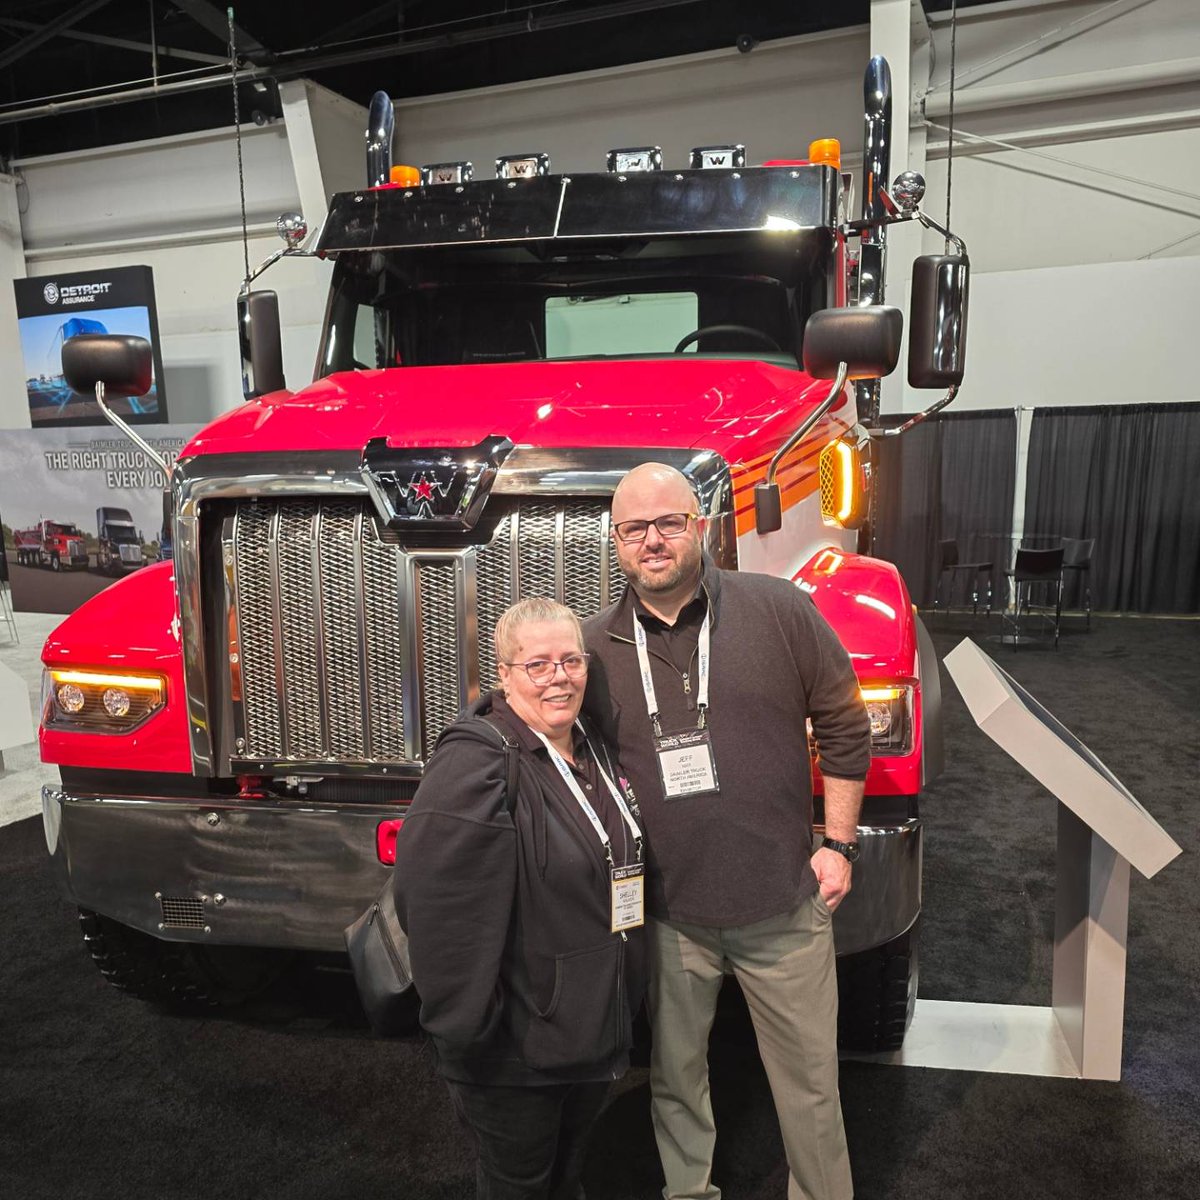 We had a great couple of days at #truckworld visiting our members and friends from the industry. 
#wtfc #truckingindustry